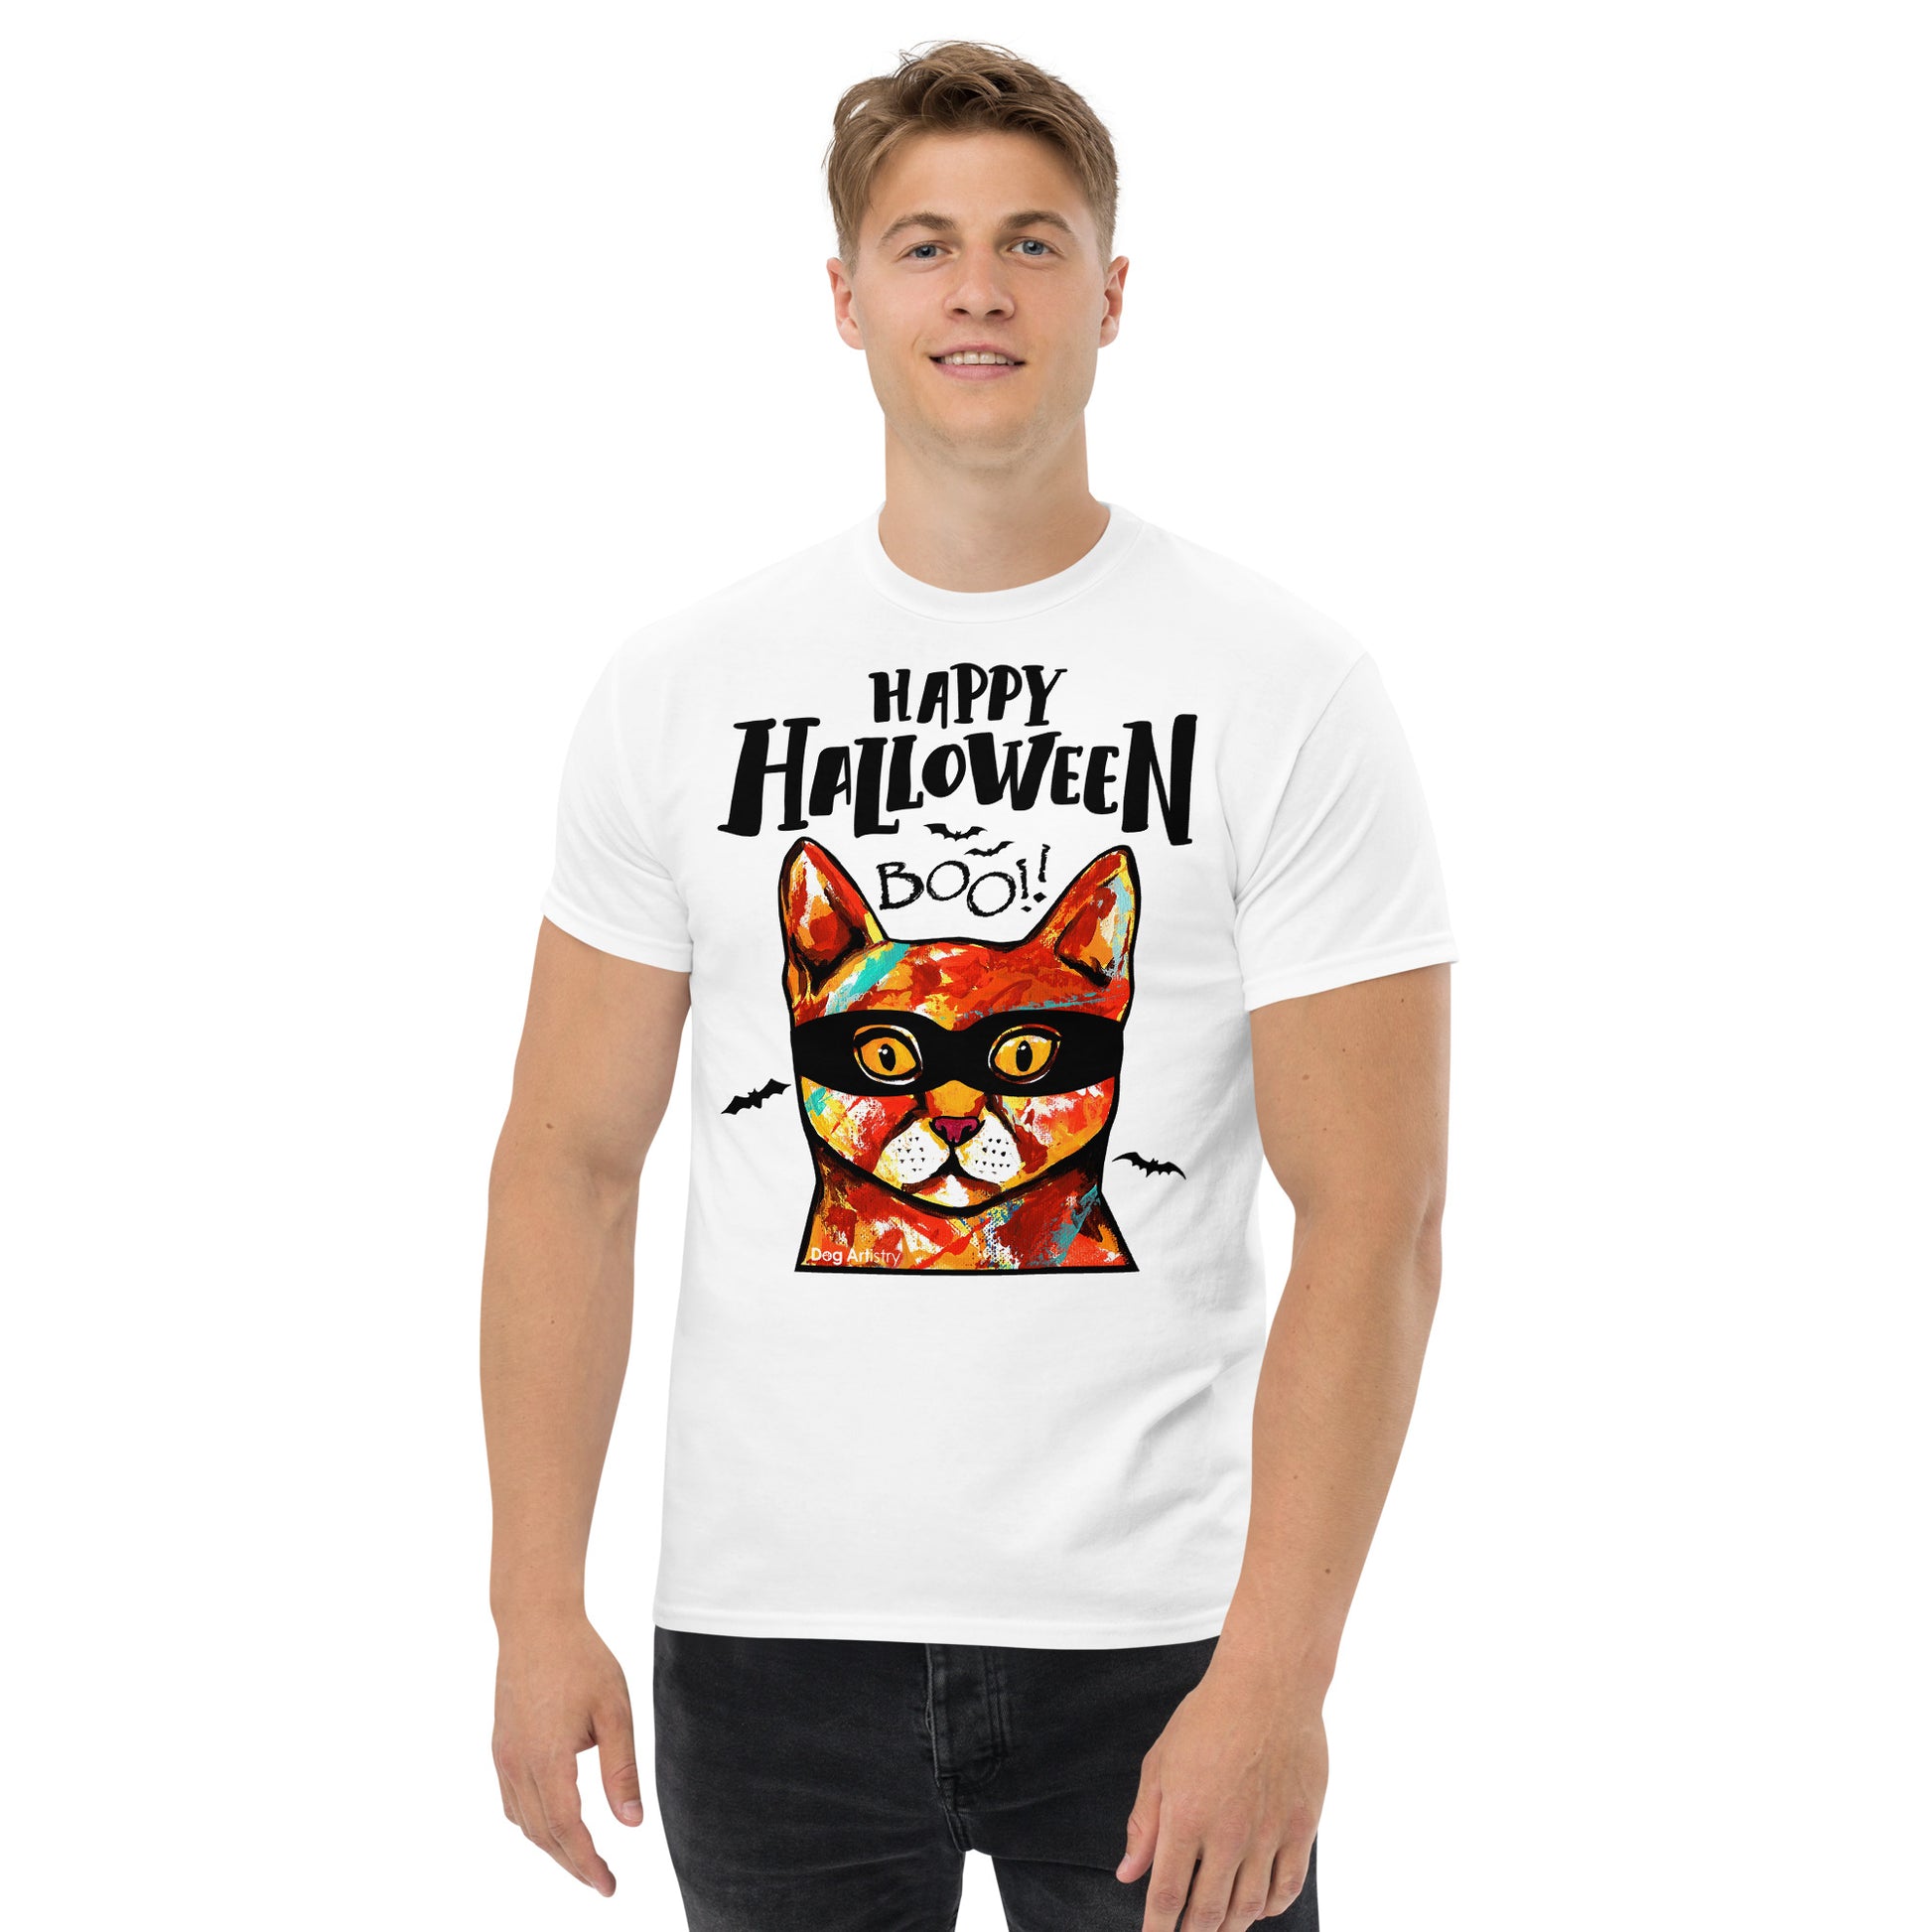 Funny Happy Halloween Cat wearing mask men’s white t-shirt by Dog Artistry.